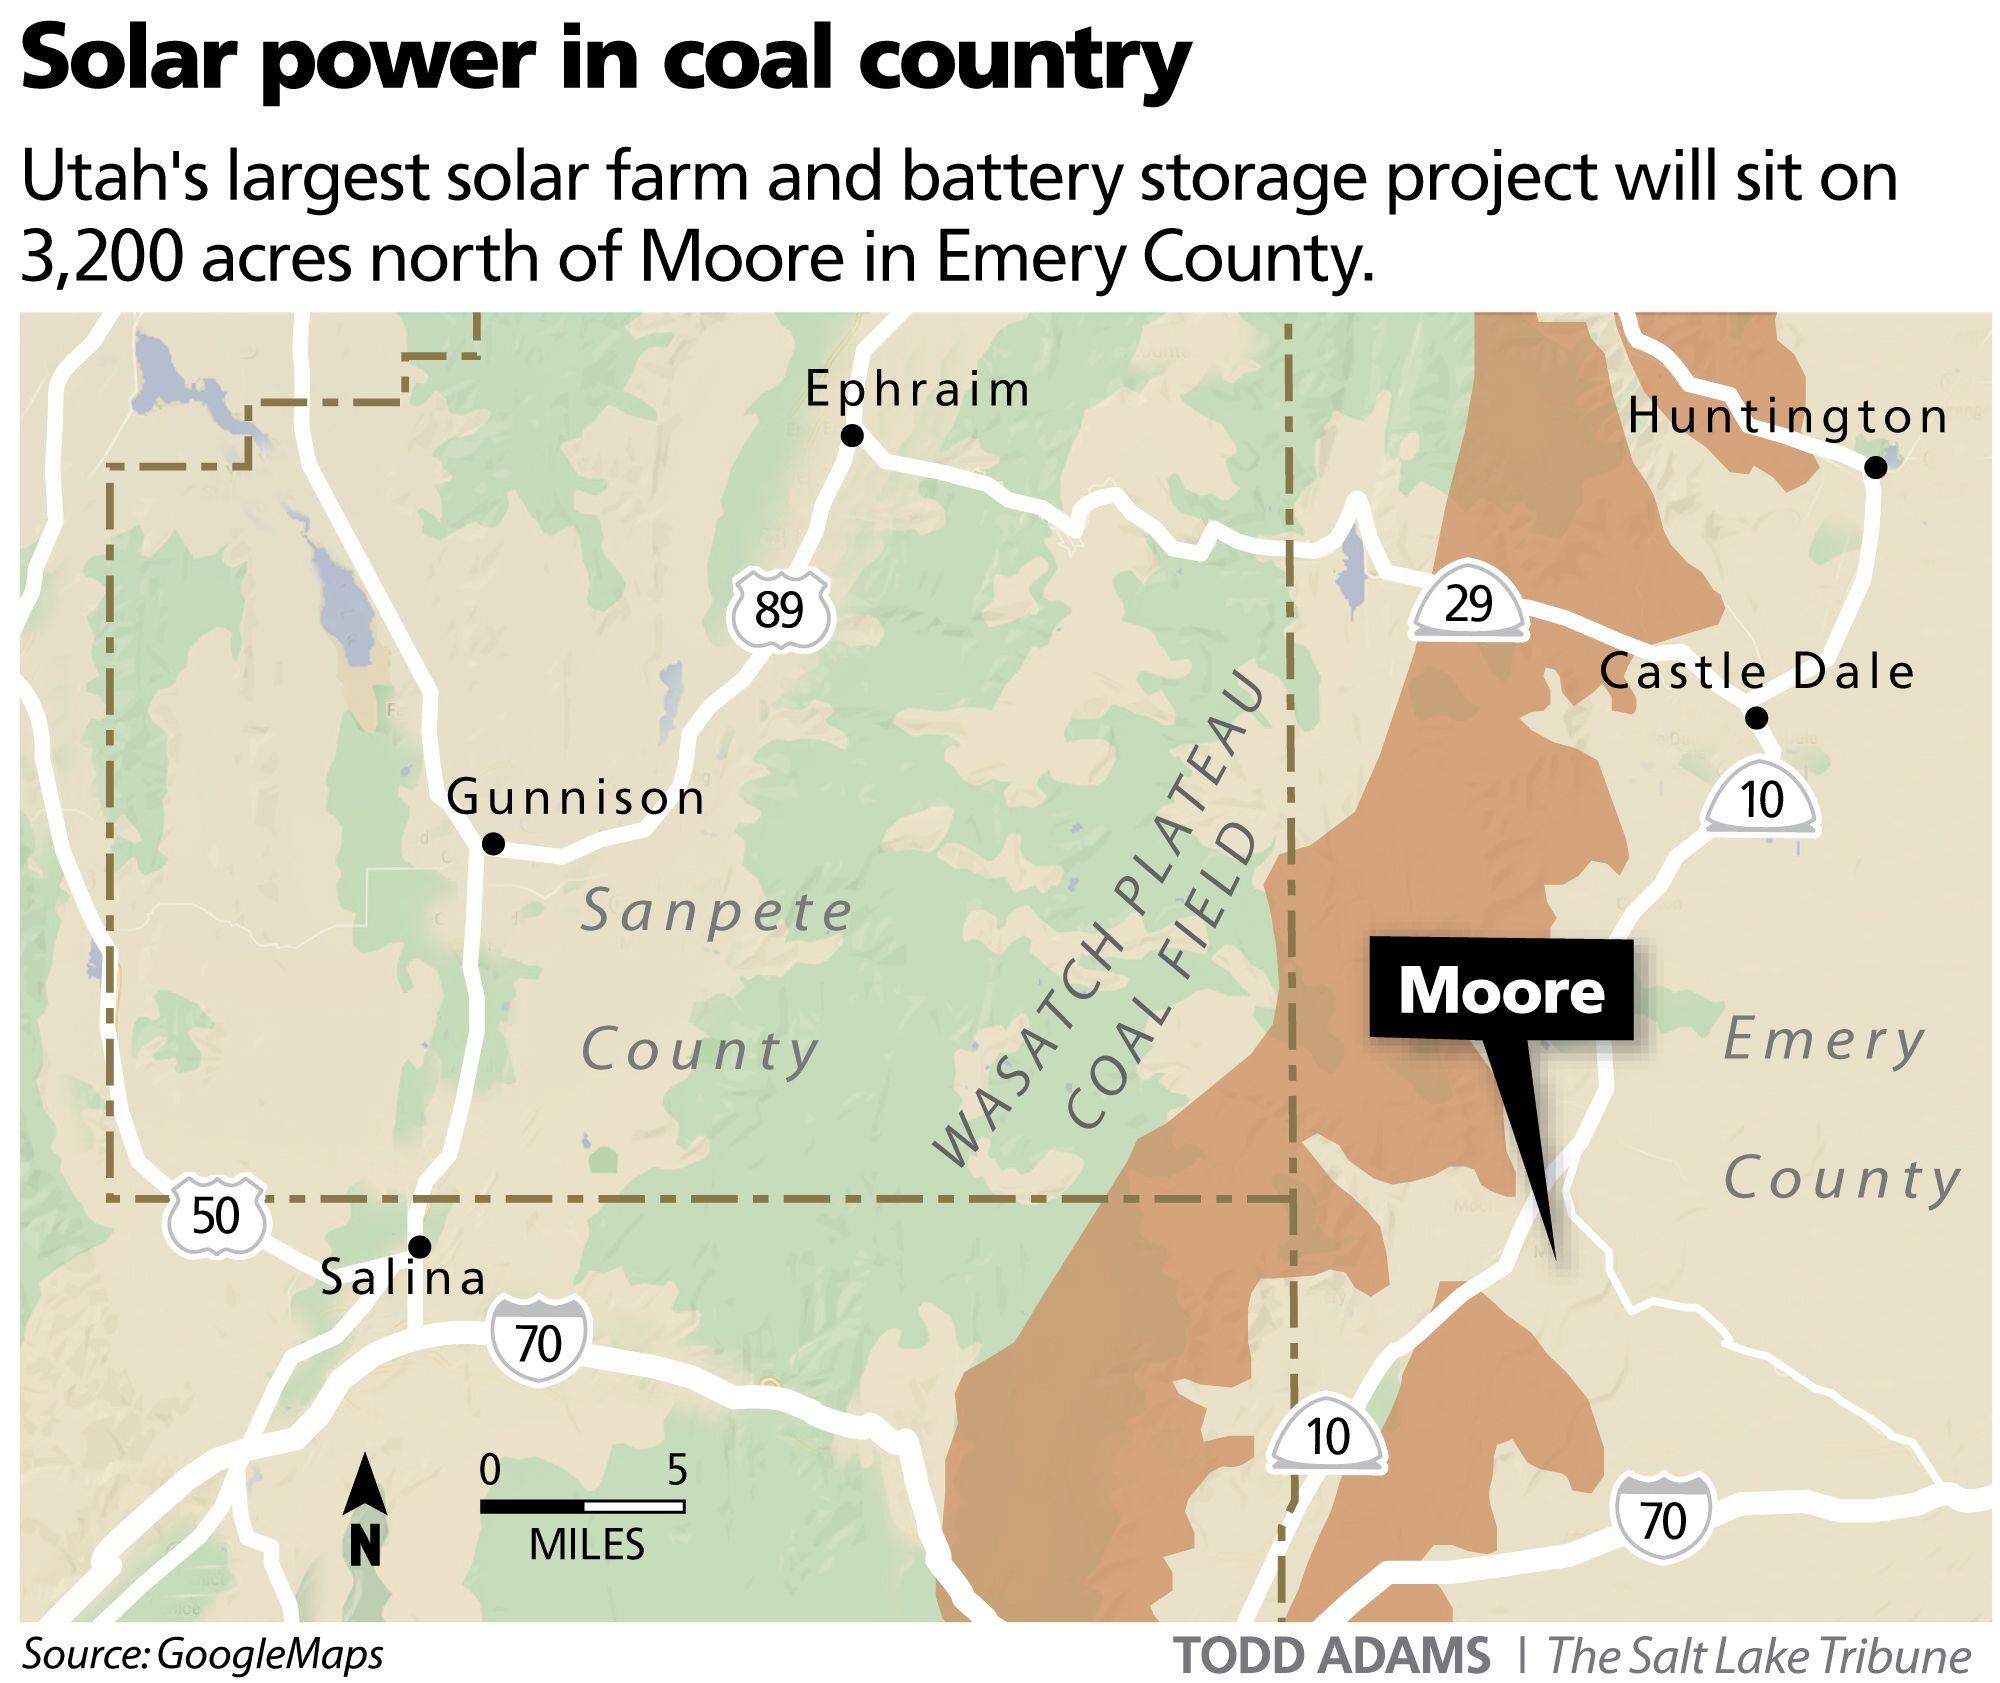 Utah's largest solar farm and battery project will sit on 3,200 acres north of Moore in Emery County.